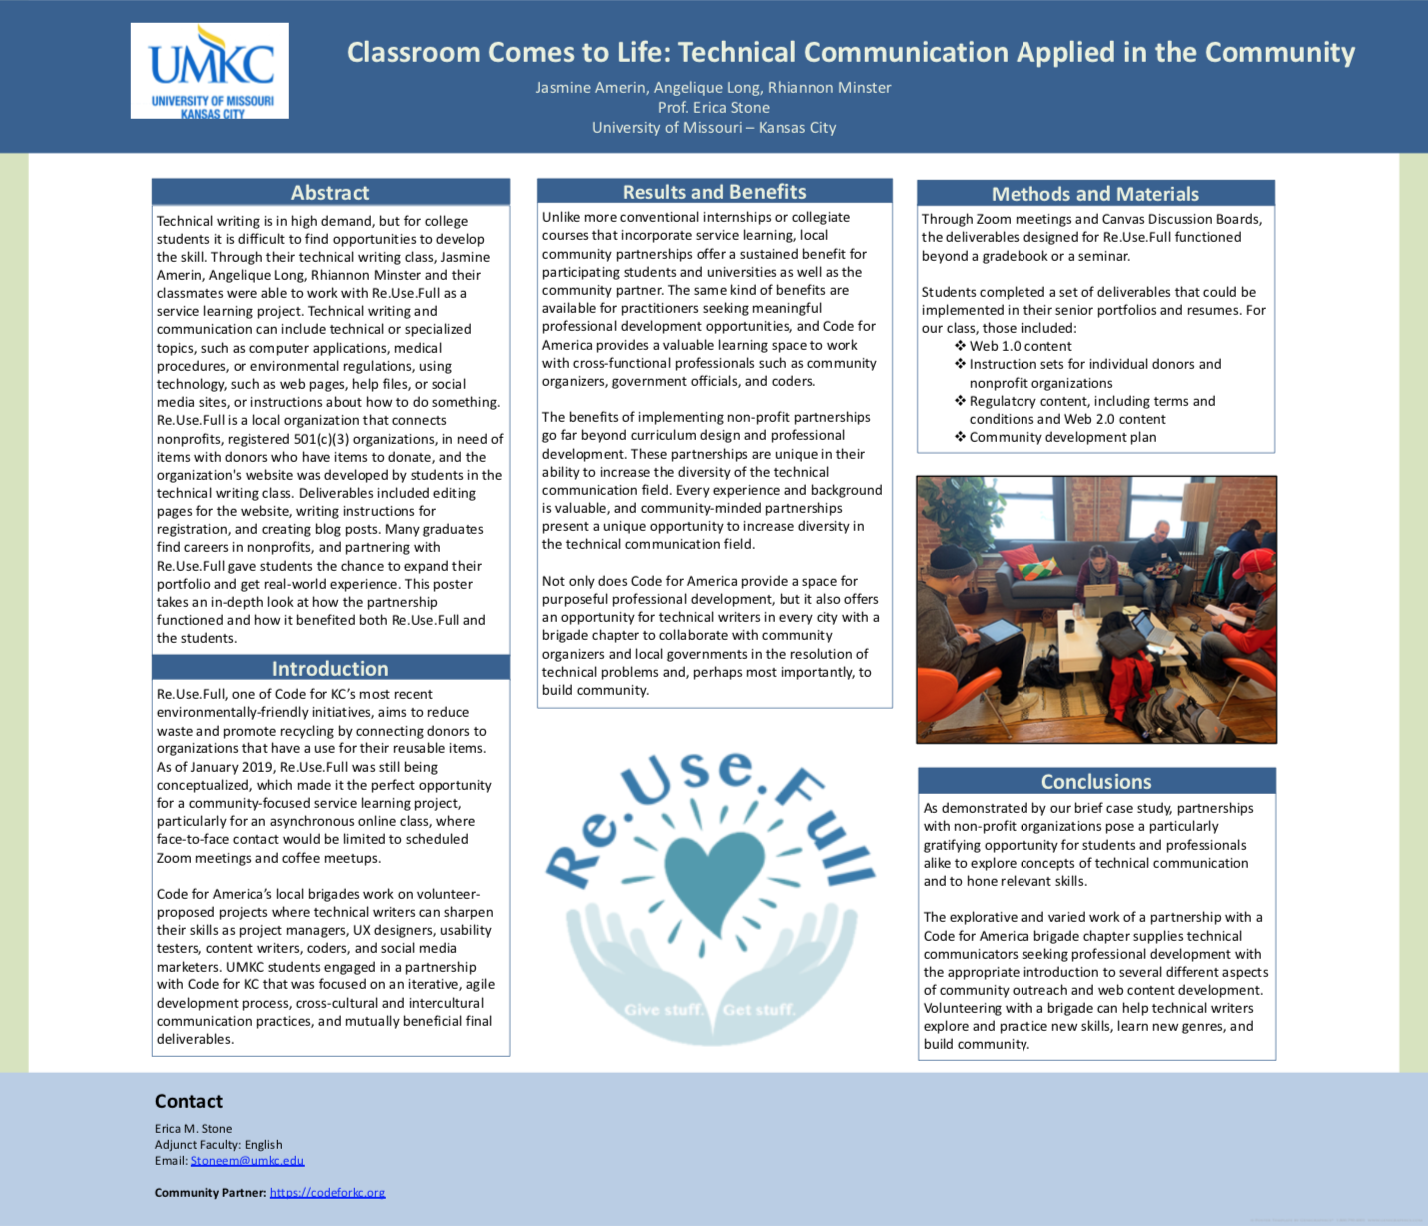 Jasmine Amerin, Angelique Long, and Rhiannon Minster’s poster, Classroom Comes to Life: Technical Communication Applied in the Community, describes the collaboration, research, production processes for our class.